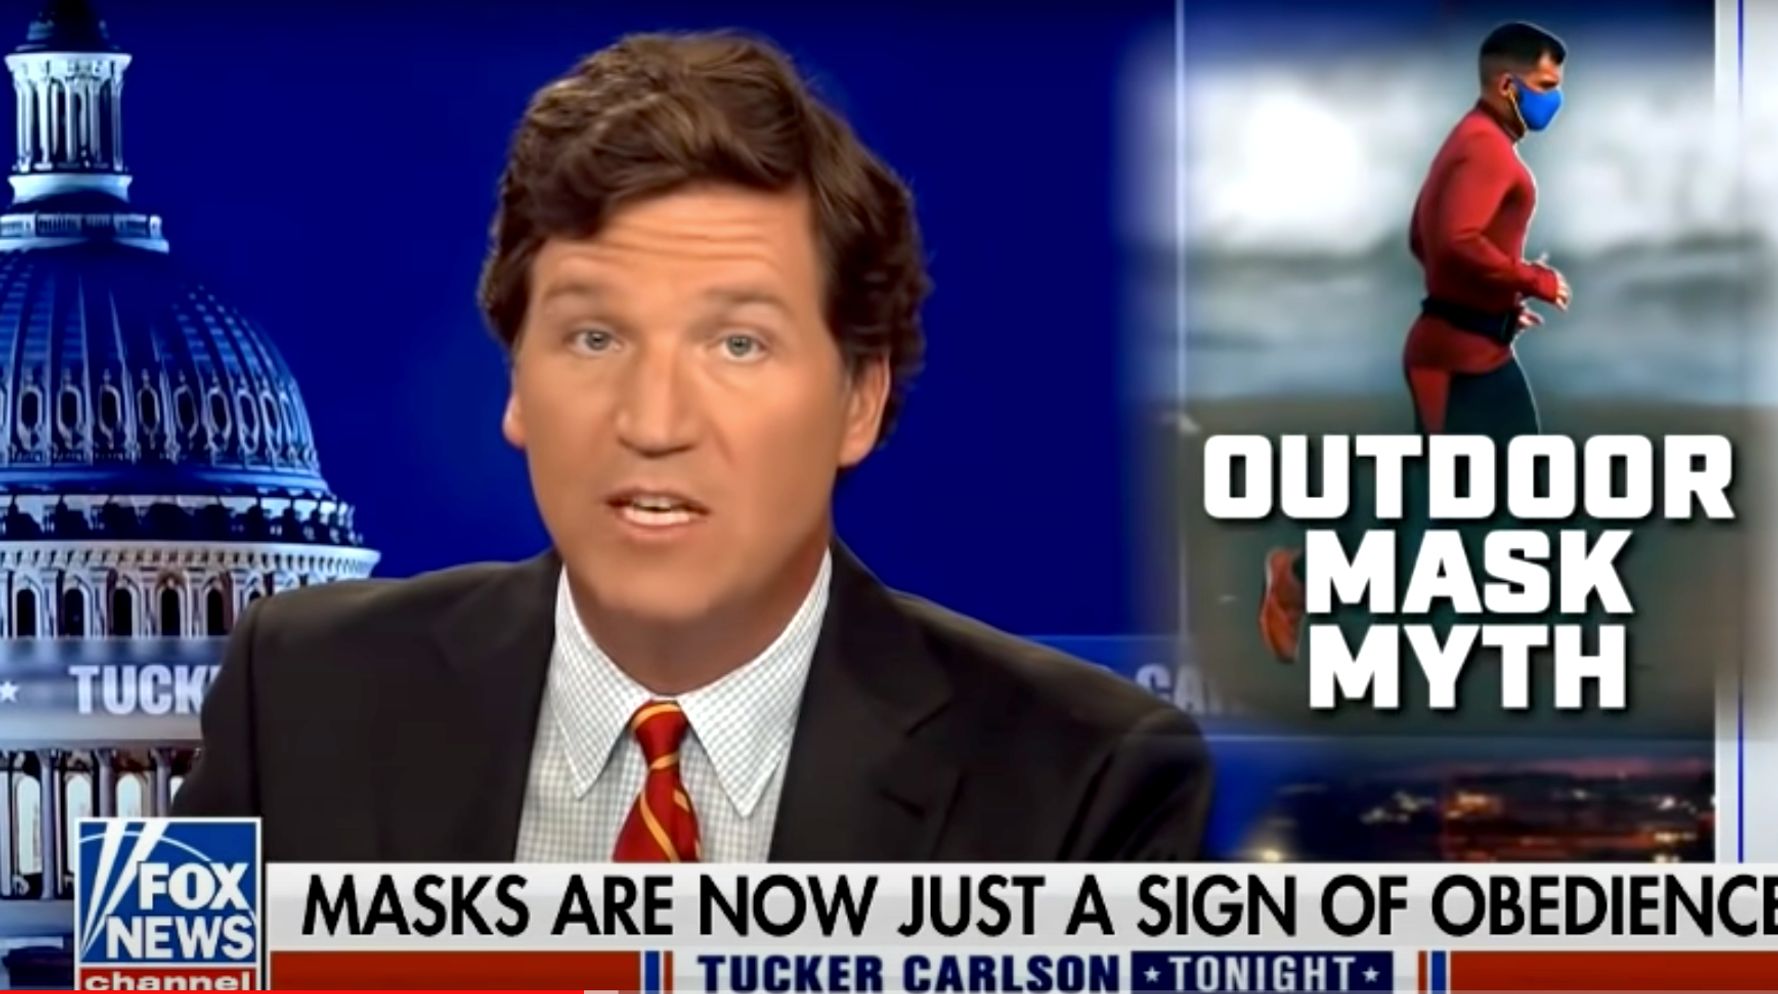 Tucker Carlson Condemned After Urging Viewers To Harass Strangers Wearing Masks